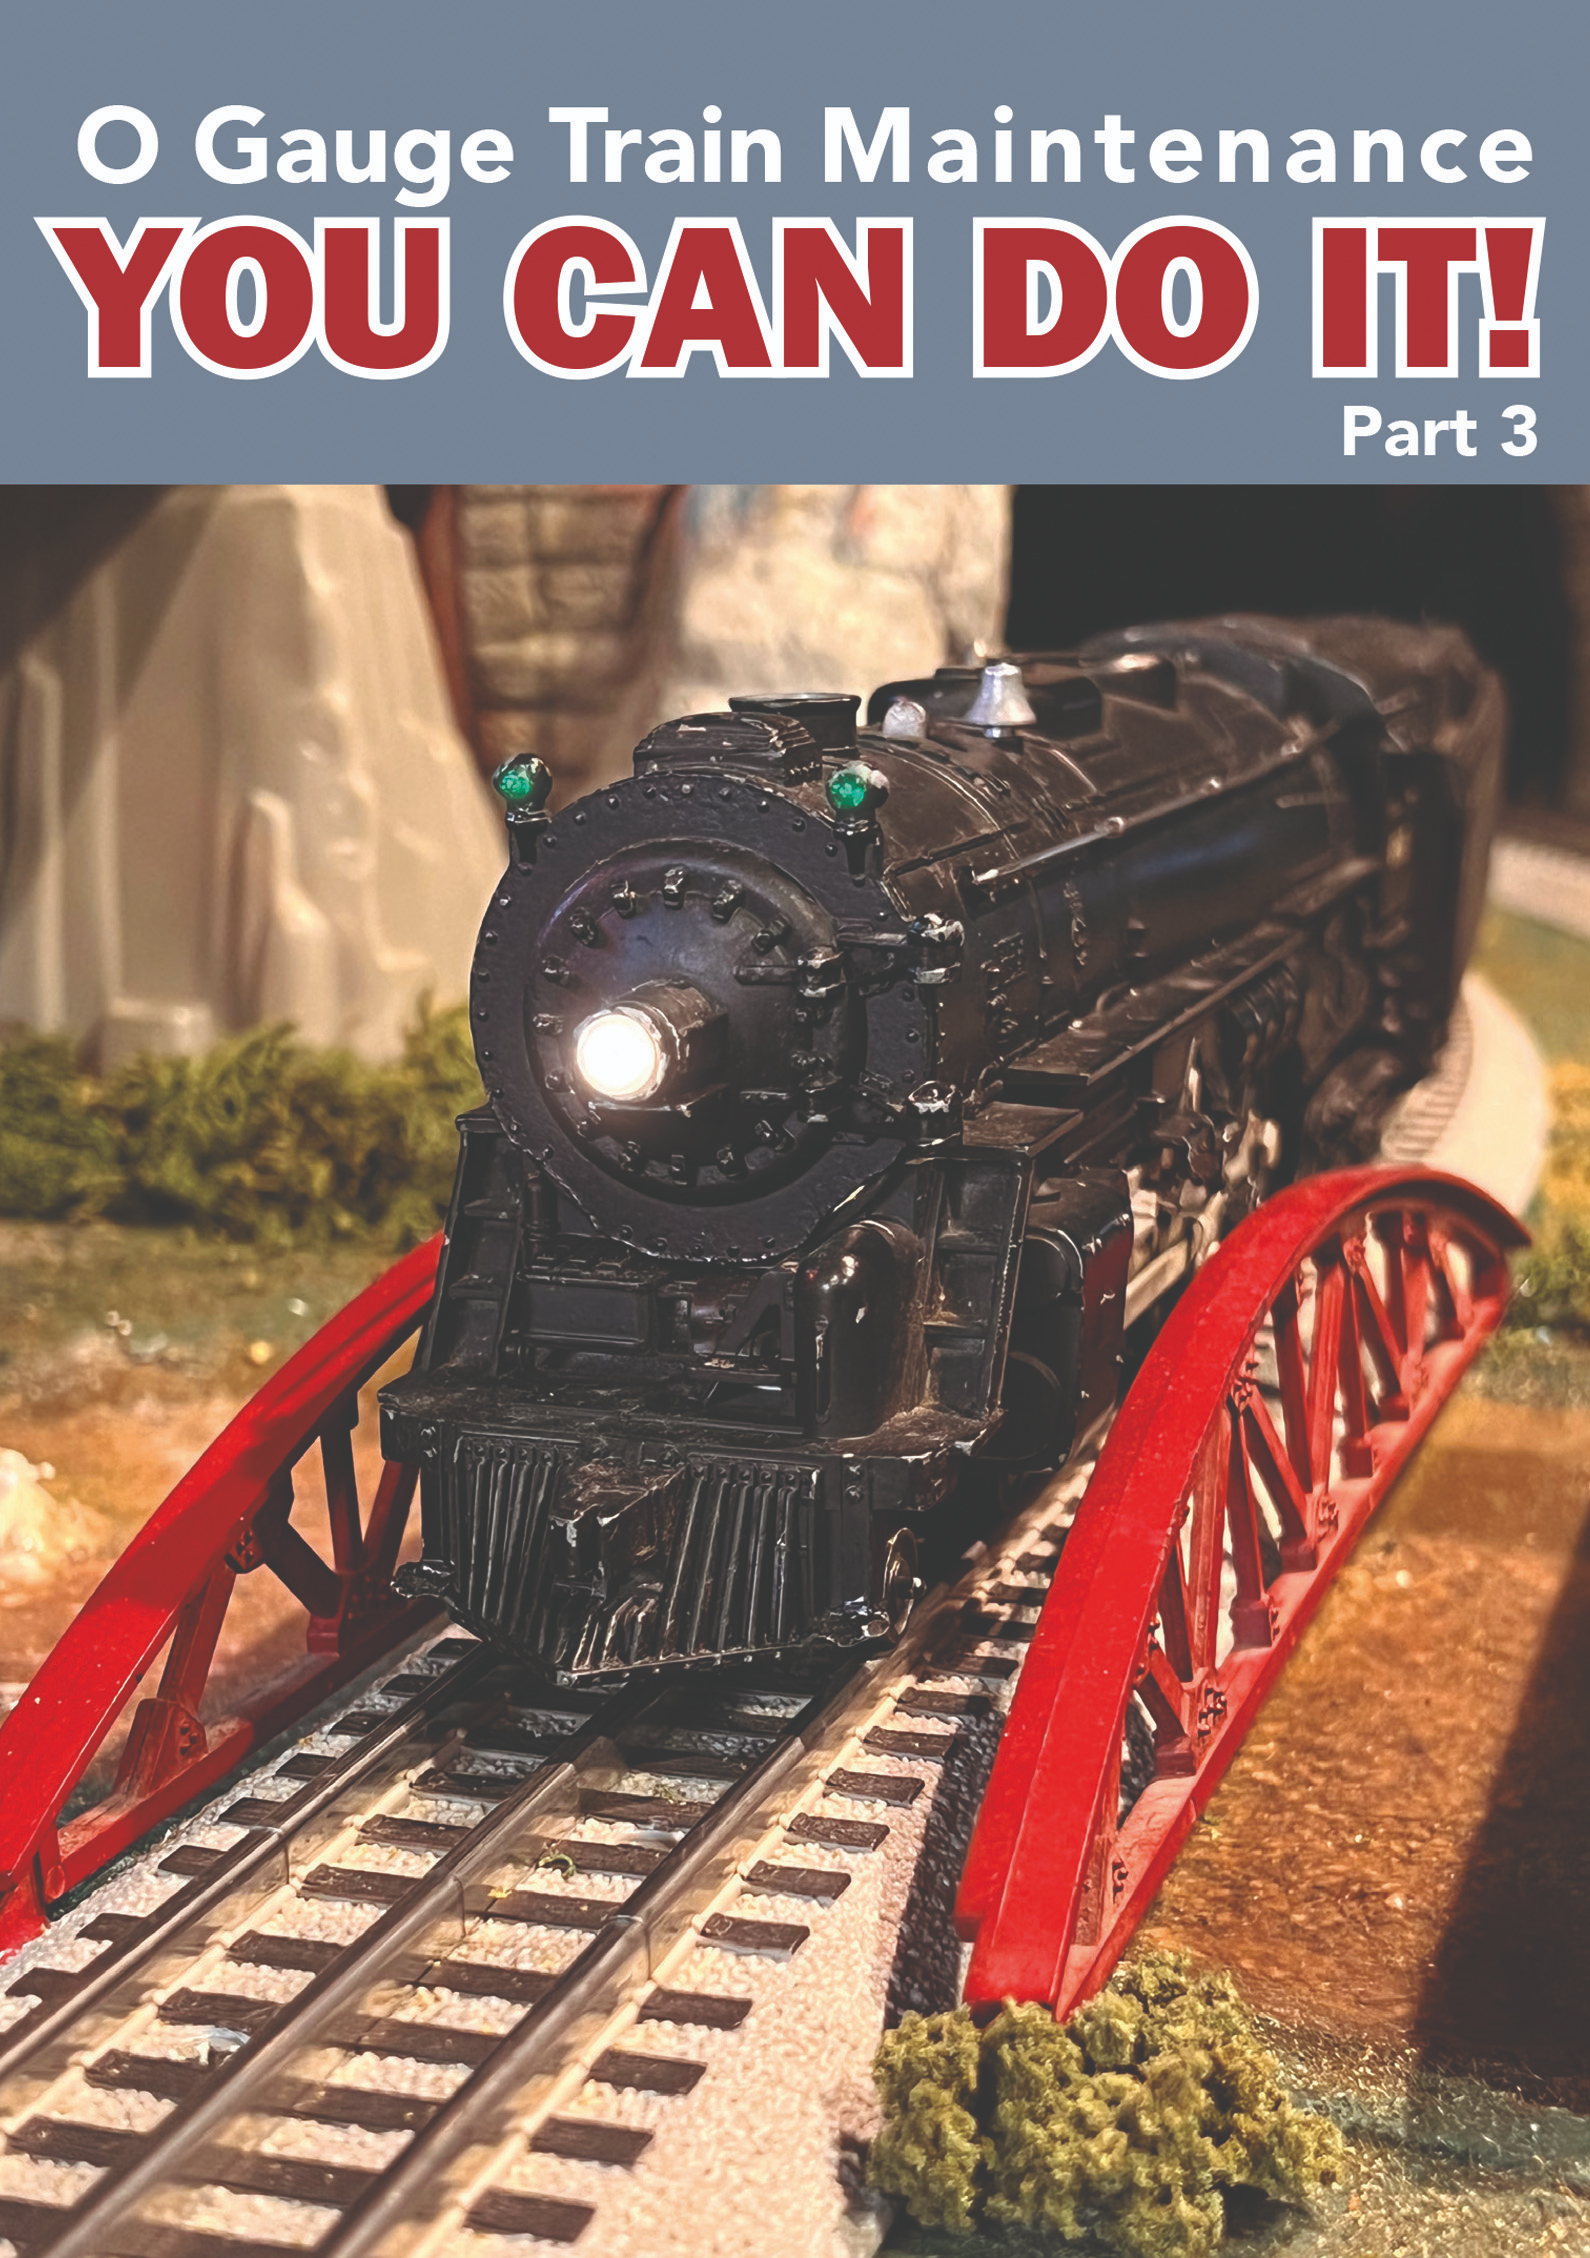 O Gauge Train Maintenance You Can Do It! Part 3 DVD TM Books and Video YOUCAN3 780484000726